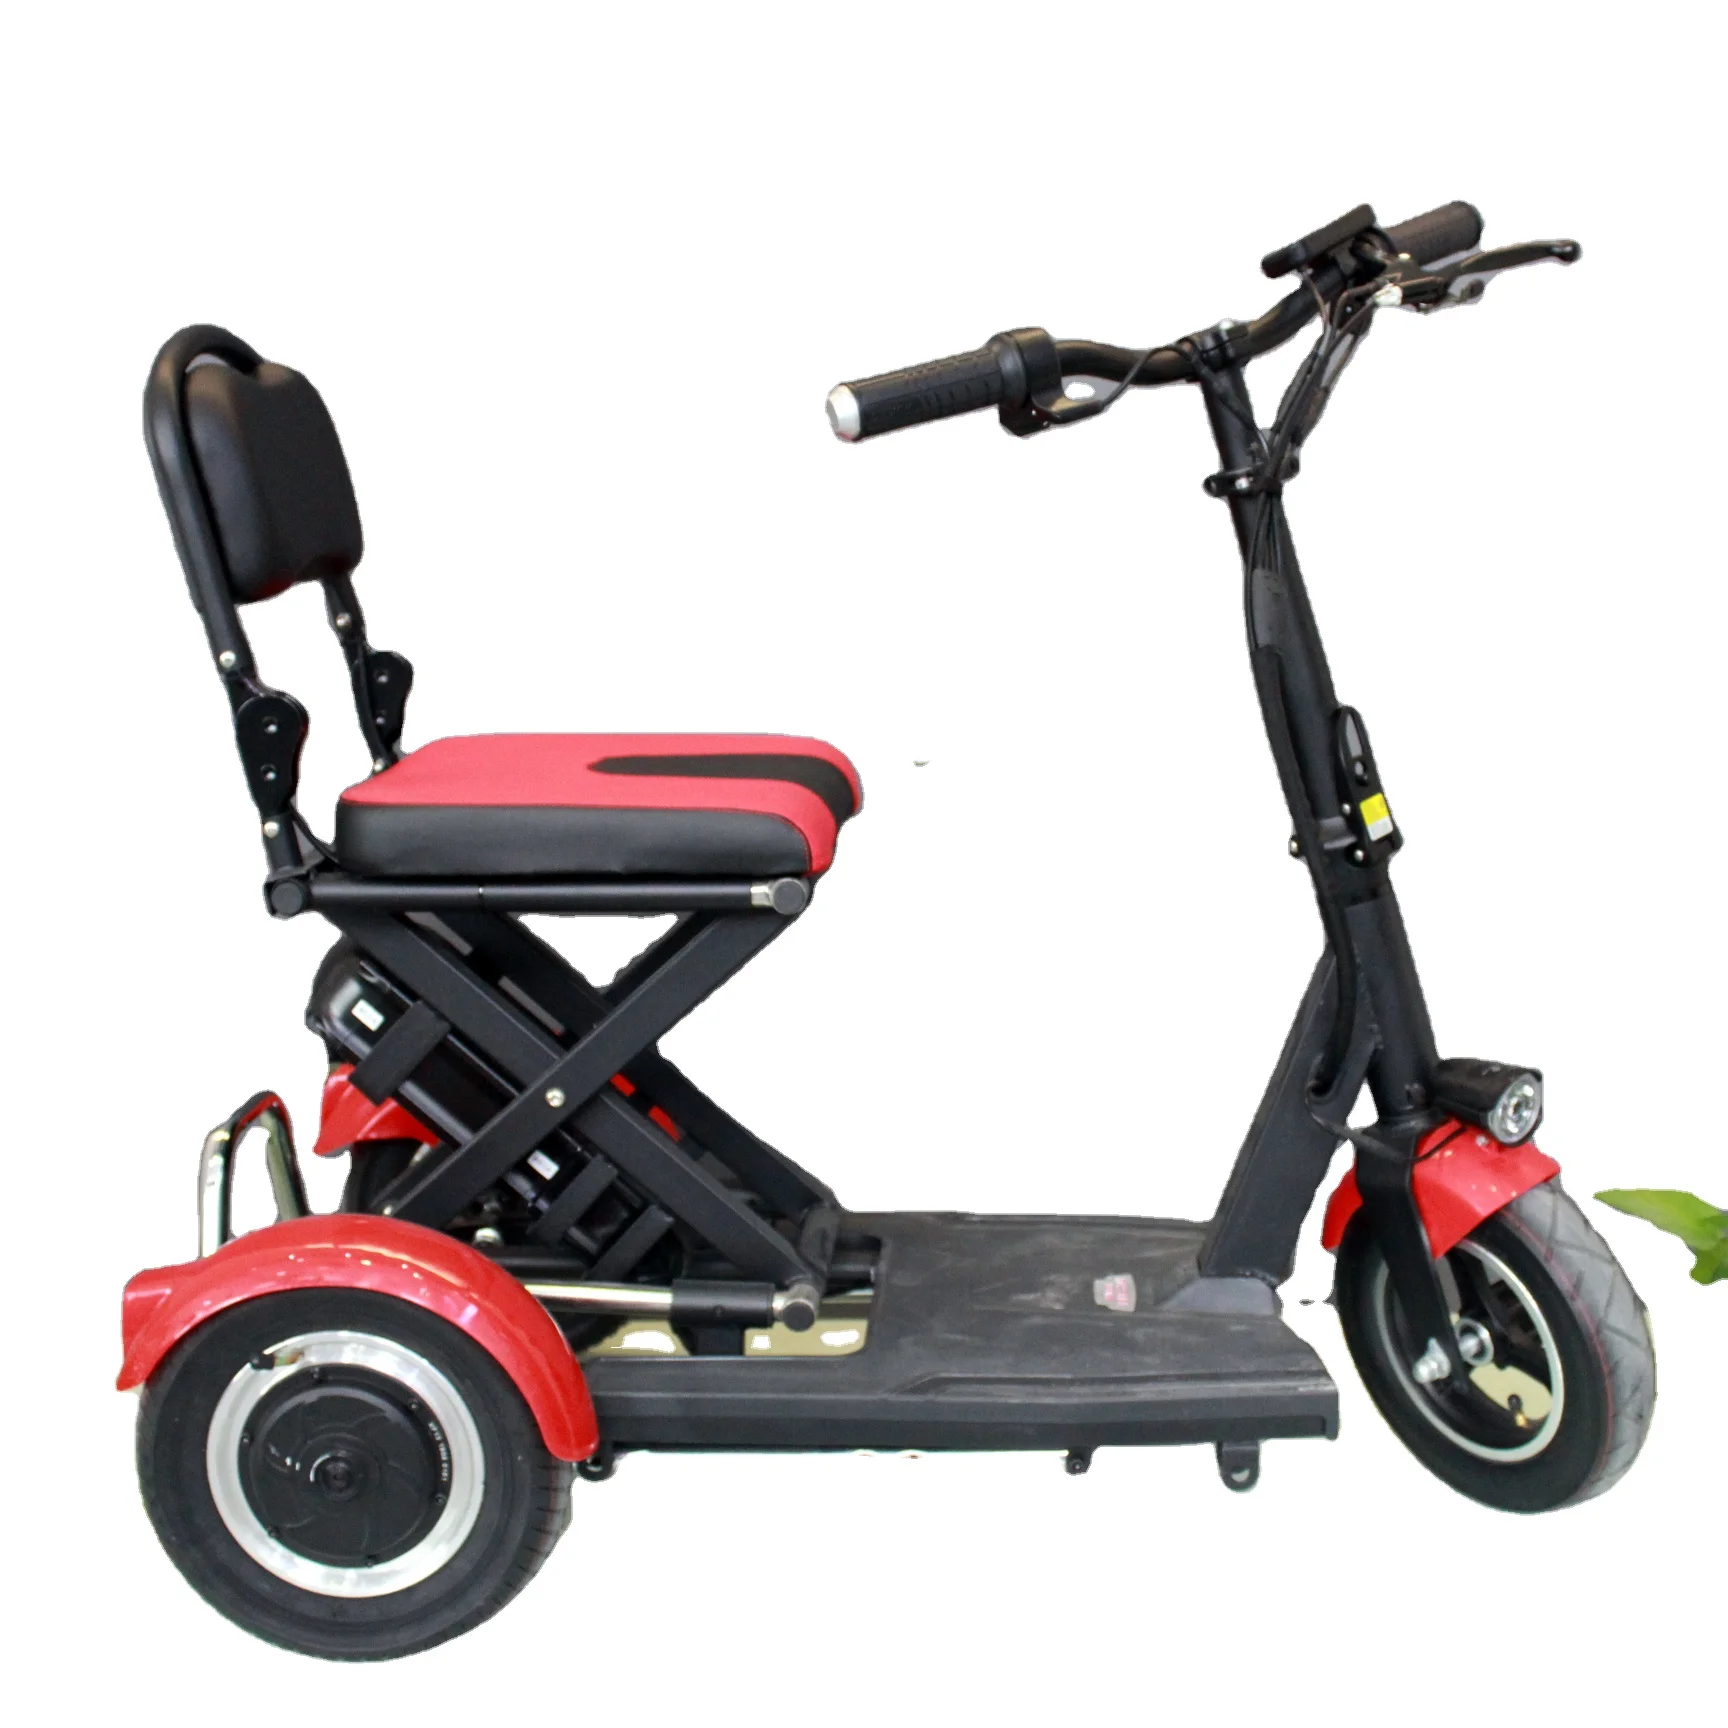 Electric Scooter Folding Type For Elderly And Disabled Handicapped Scooters 36v/48v 10Ah Lithium Battery Motor Scooter custom engwe t14 folding electric bicycle 14 inch tire 250w brushless motor 48v 10ah battery 25km h max speed orange